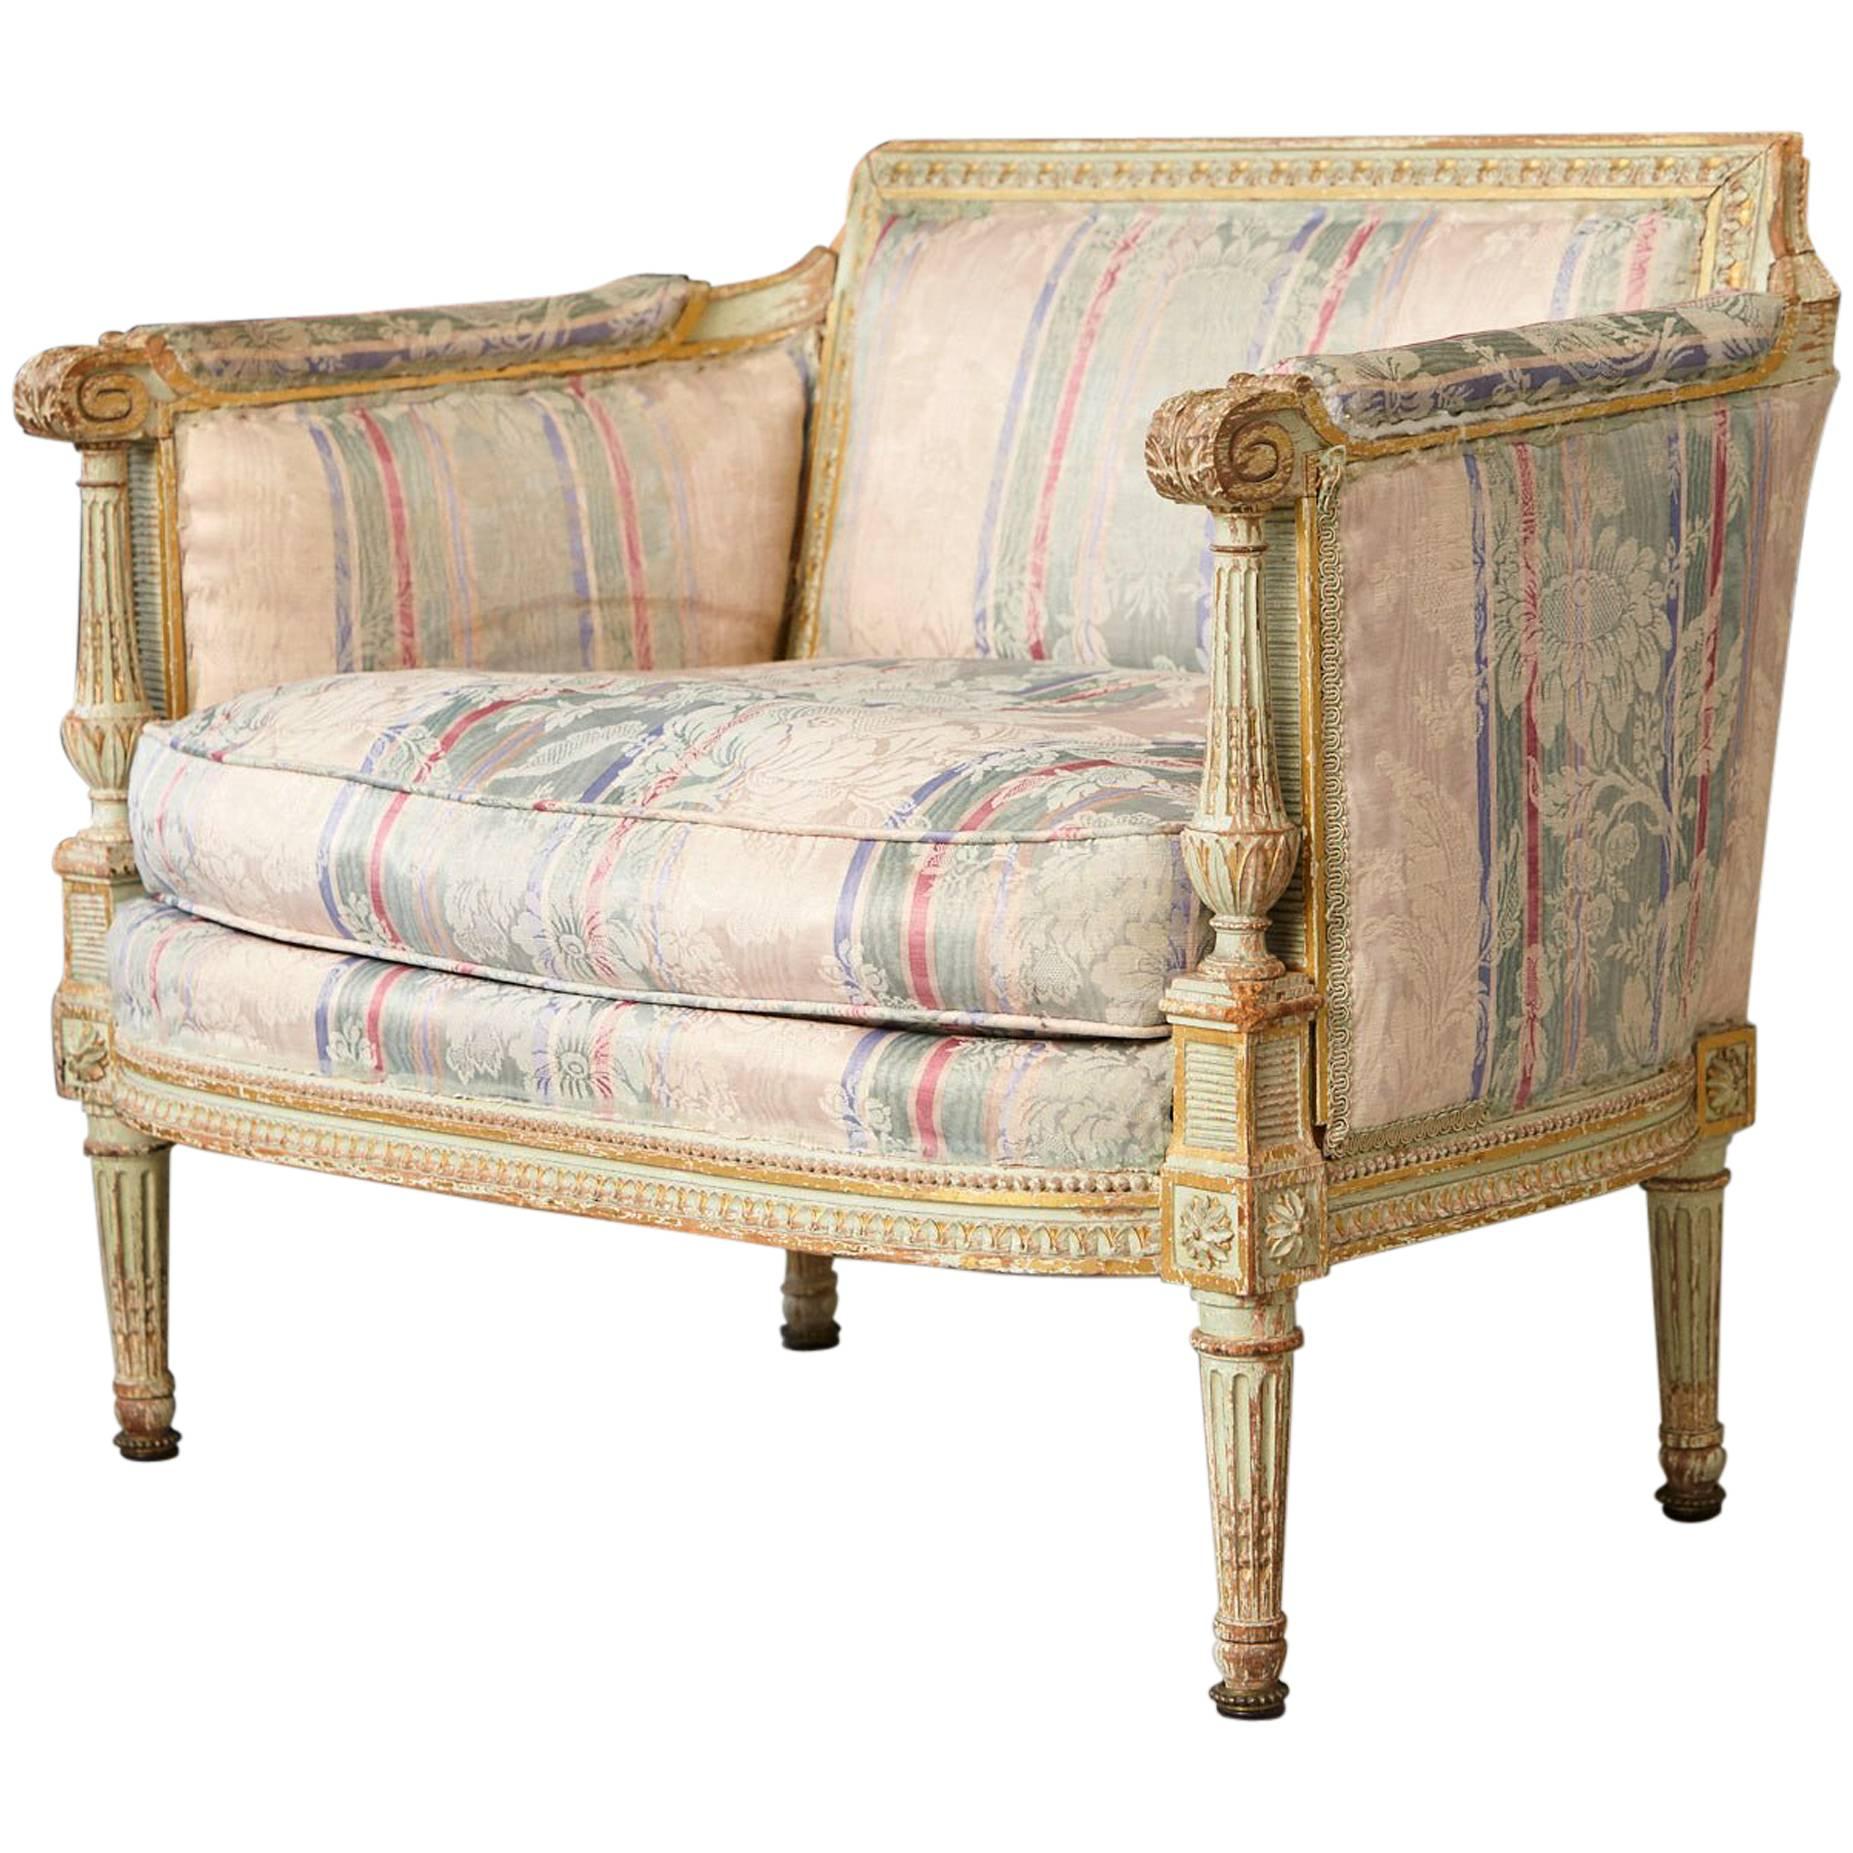 19th Century French Paint and Gild Decorated Bèrgere in the Style of Louis XVI